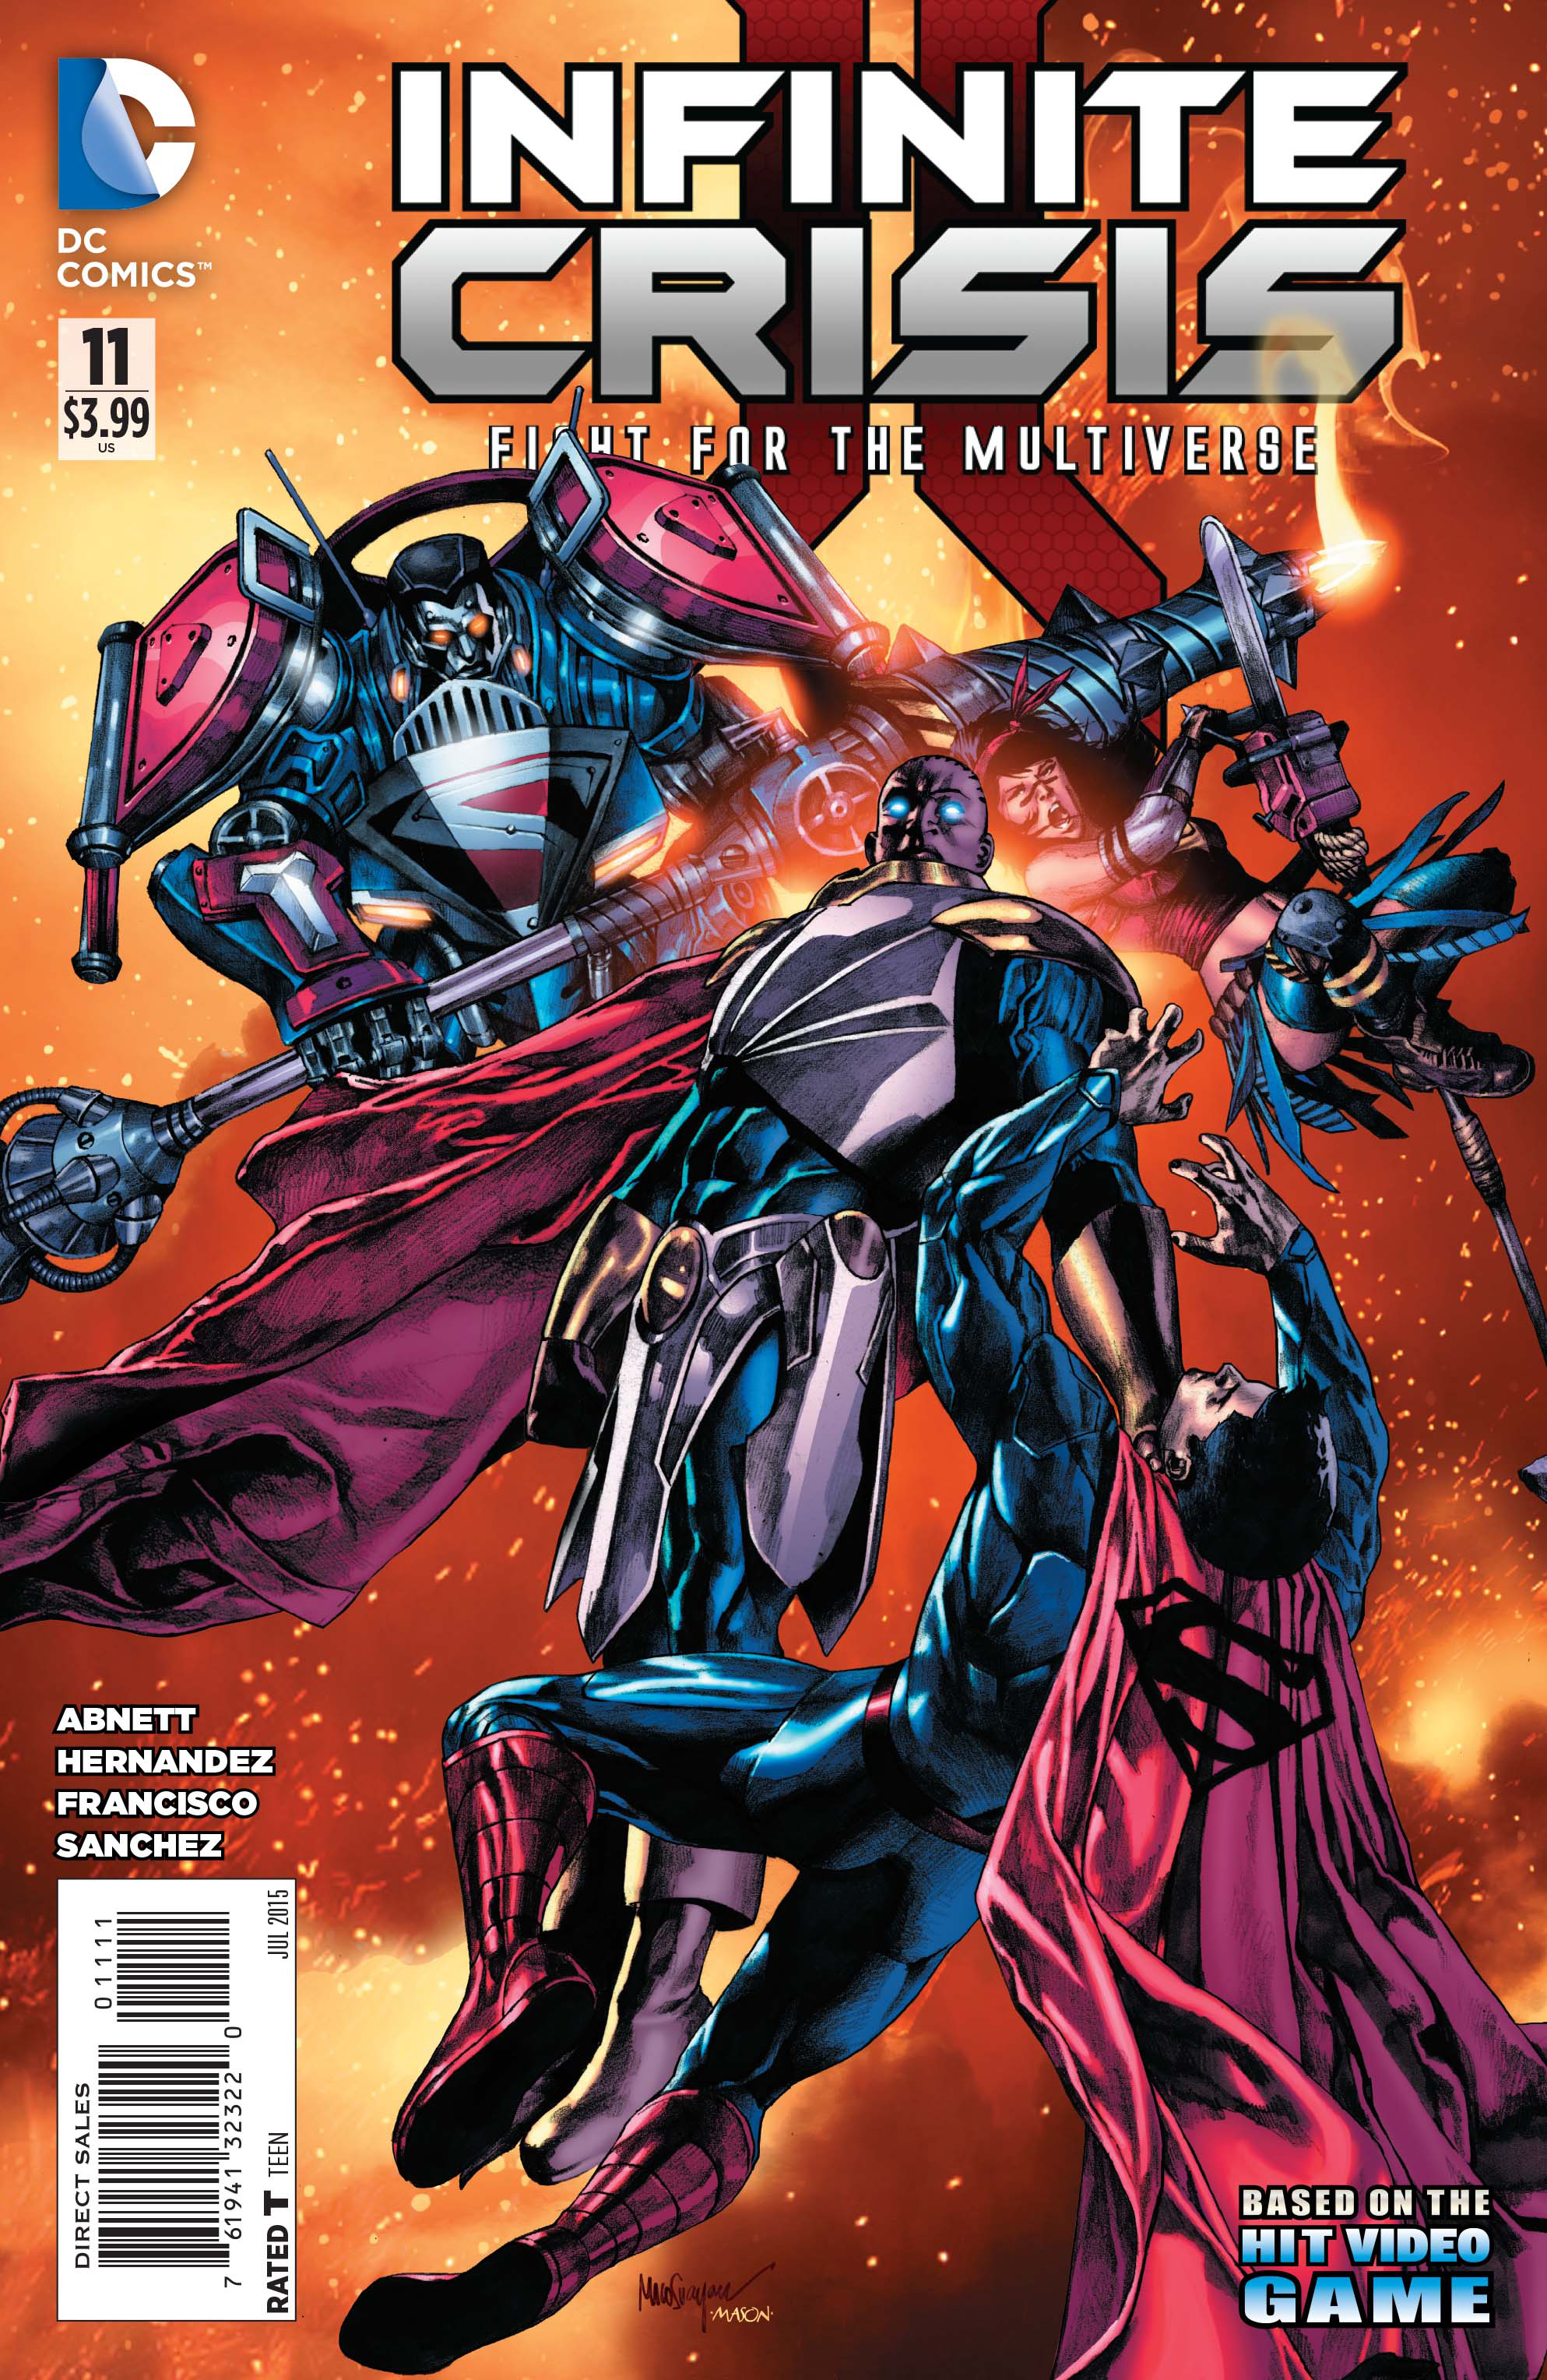 INFINITE CRISIS FIGHT FOR THE MULTIVERSE #11